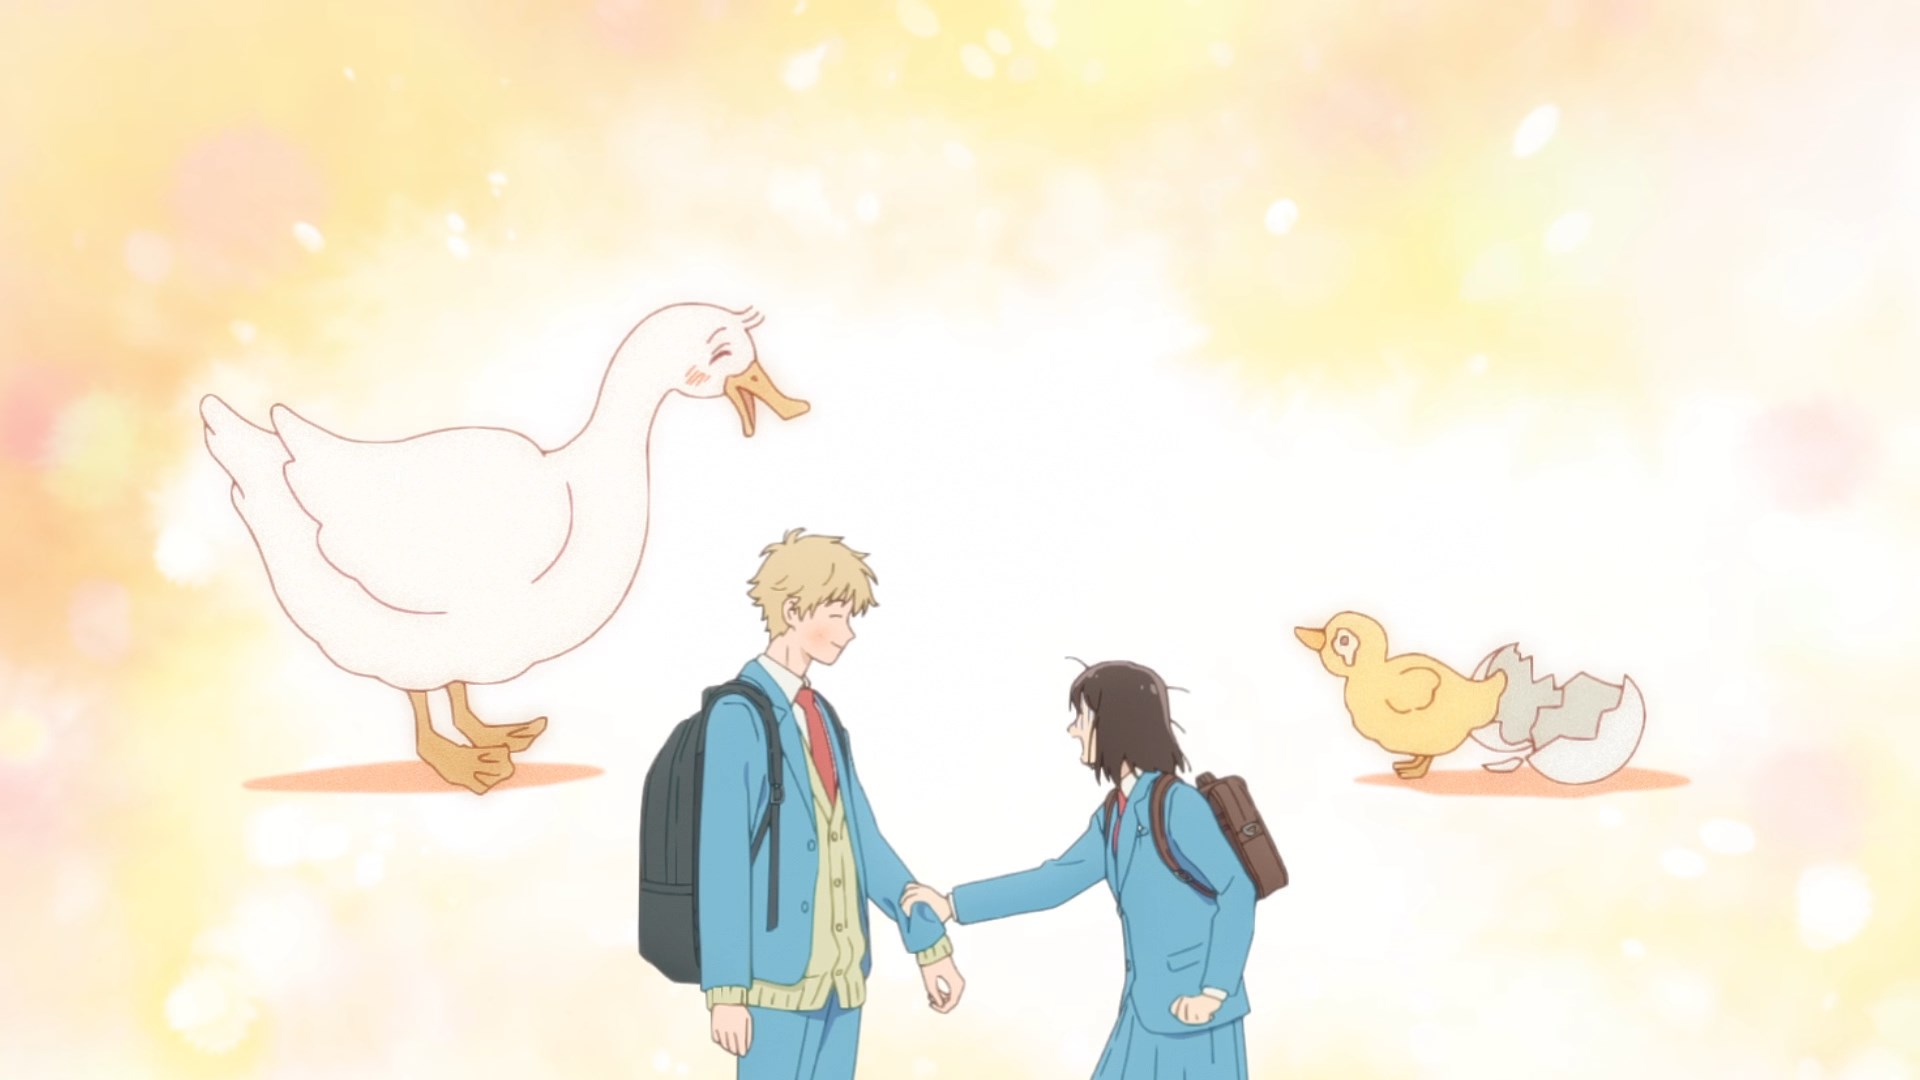 Friendly Shima meeting a lost Mitsuki who imprints on him like a duckling on its mother as pictured in the background